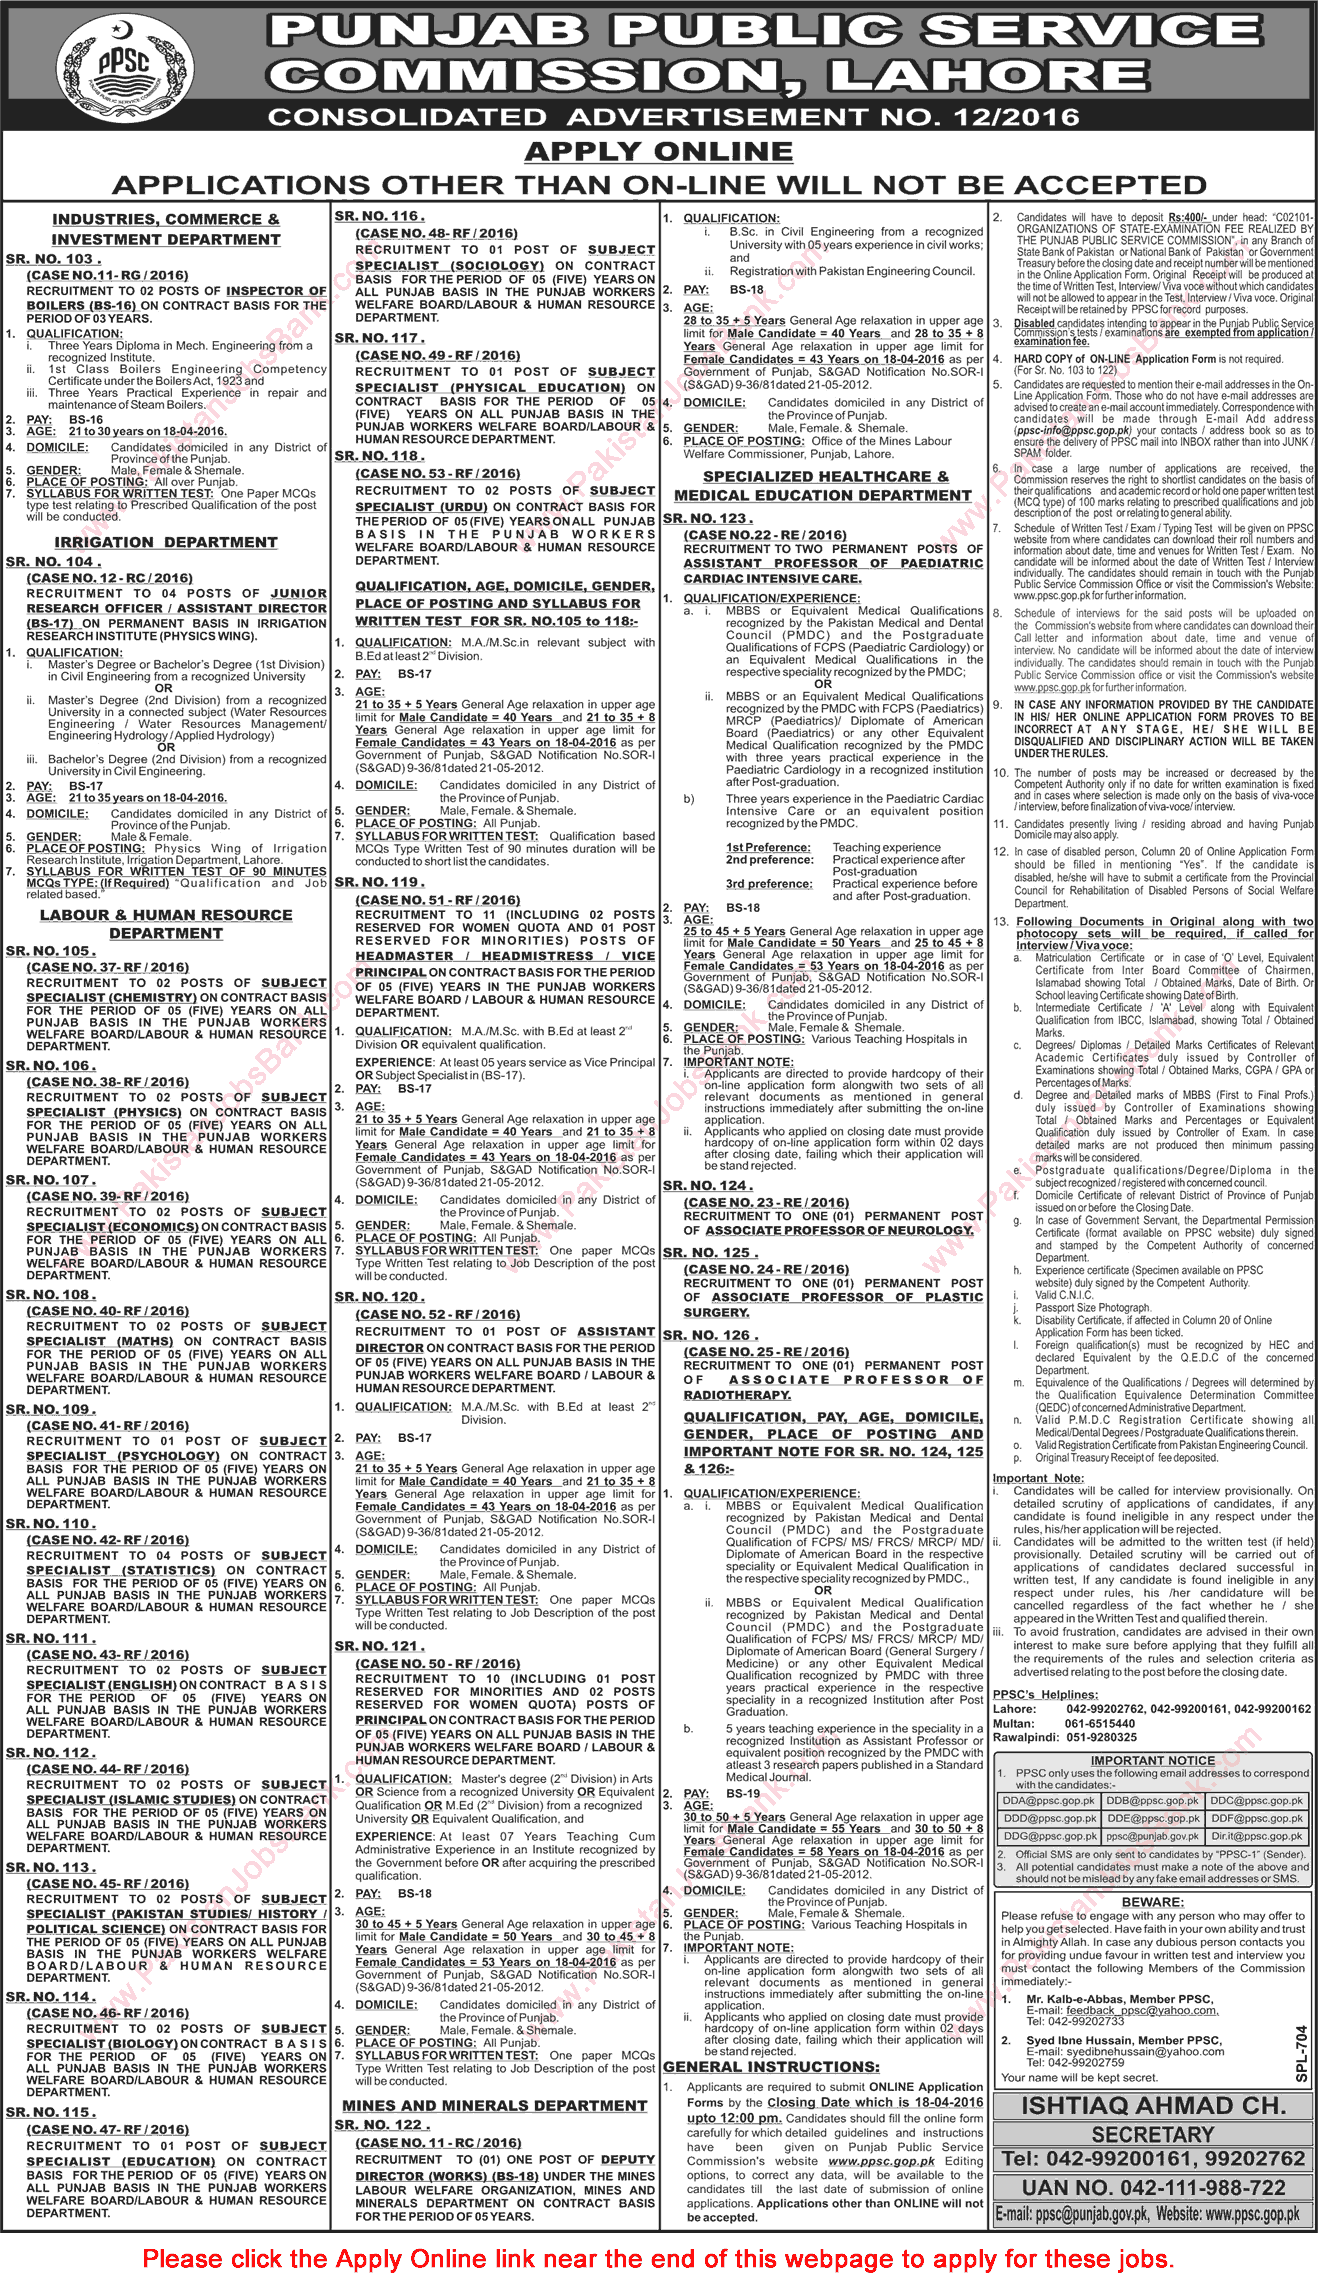 PPSC Jobs April 2016 Consolidated Advertisement No 12/2016 Apply Online Latest